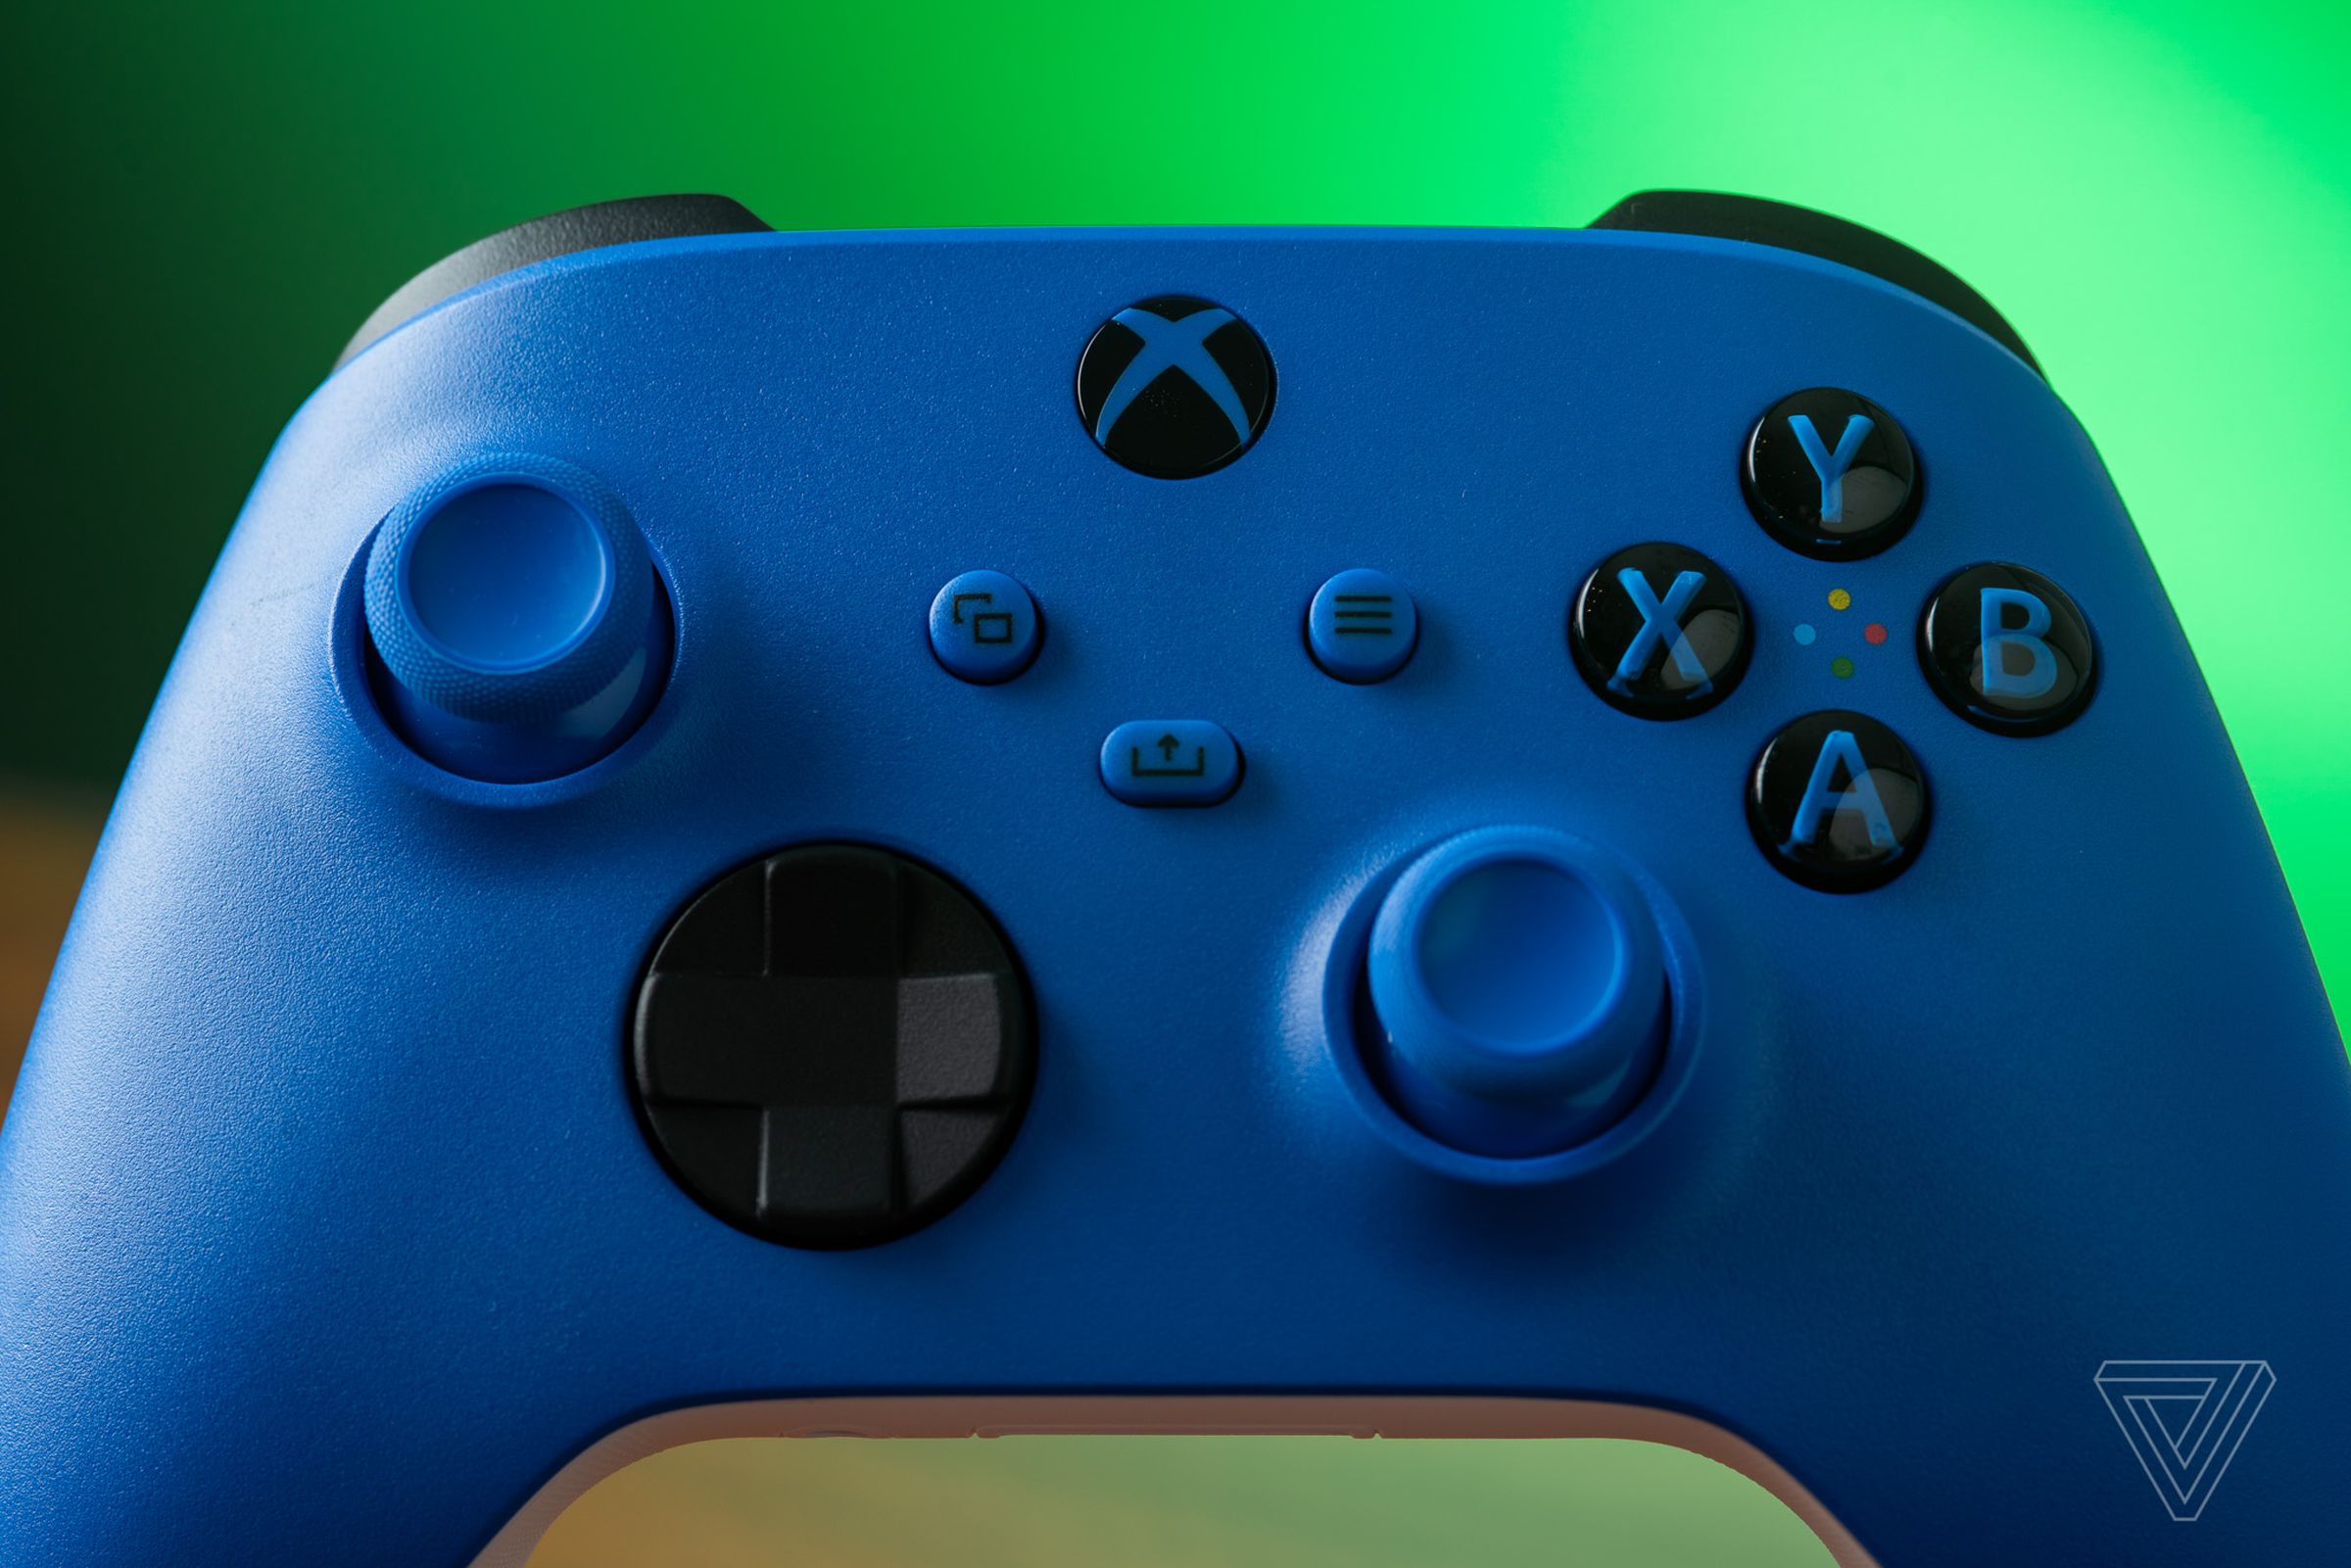 Attention to detail: Microsoft color-matches the light-up Xbox button to the controller.